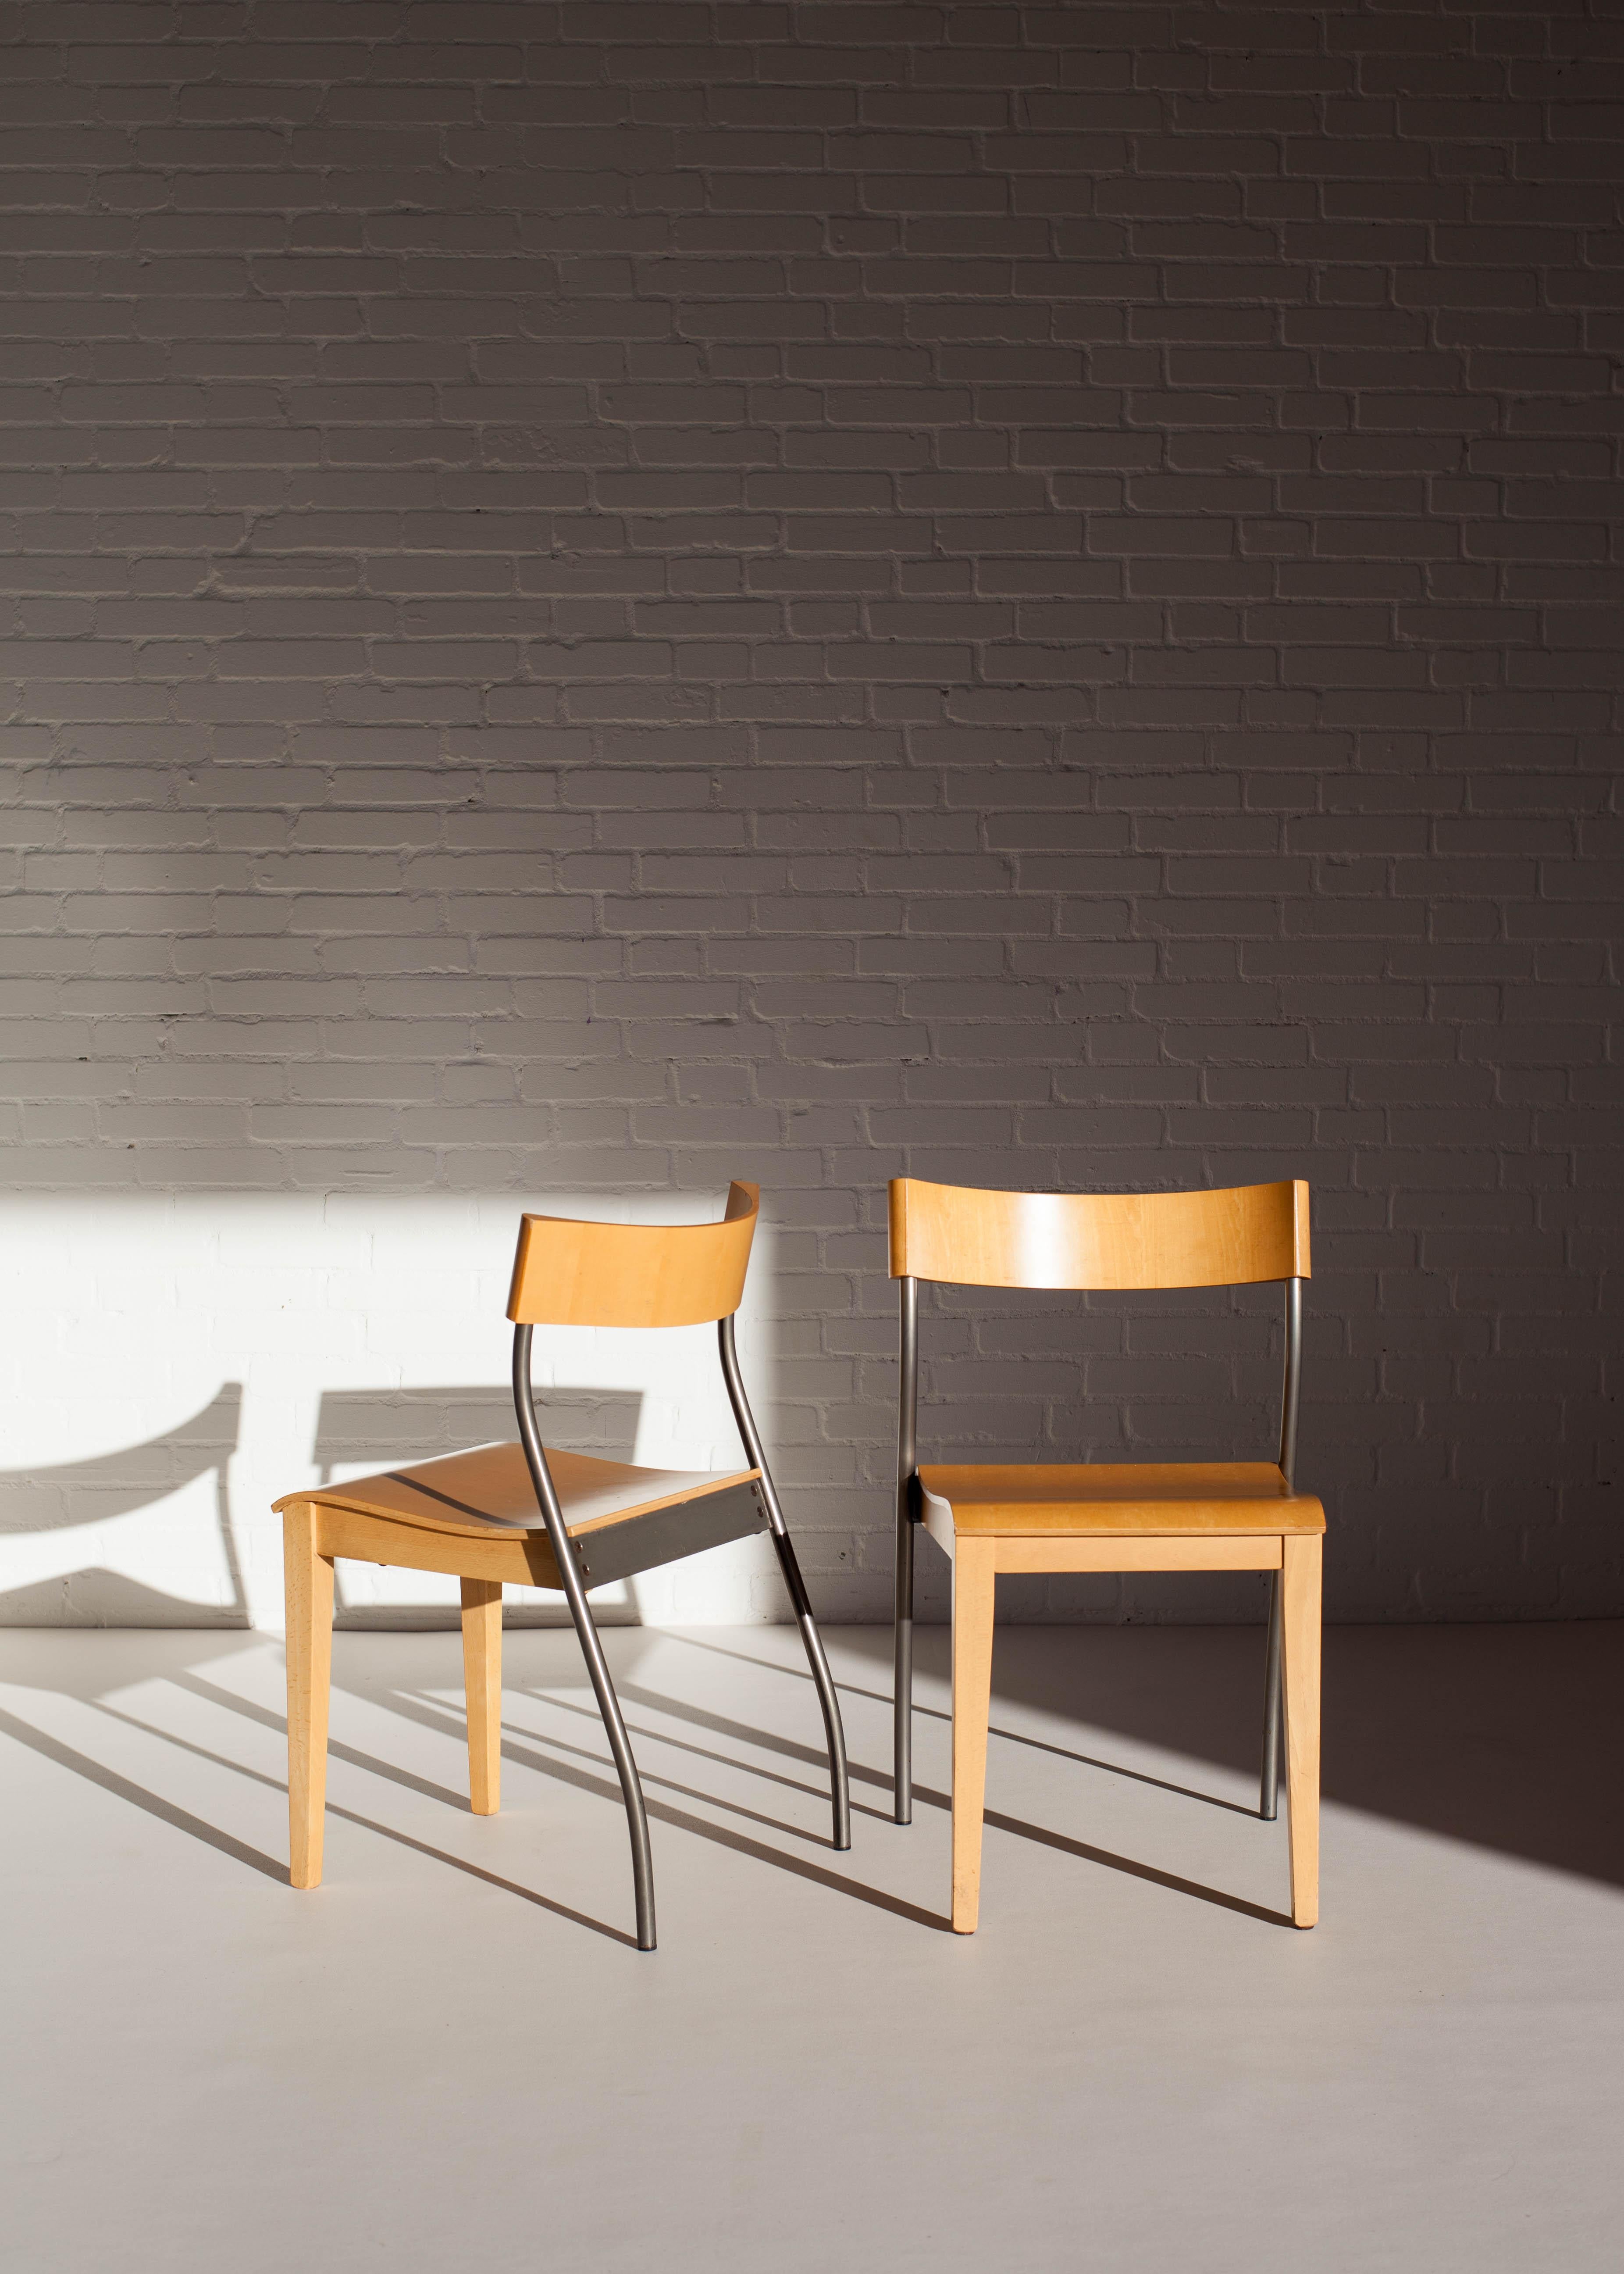 These vintage postmodern chairs were designed for Ikea in the 1990s. Undeniably the designer must have been inspired by the Ligne Roset RIO dining chairs by Pascal and Olivier Mourgue. Both designs resonate in their rectangular use of wood and